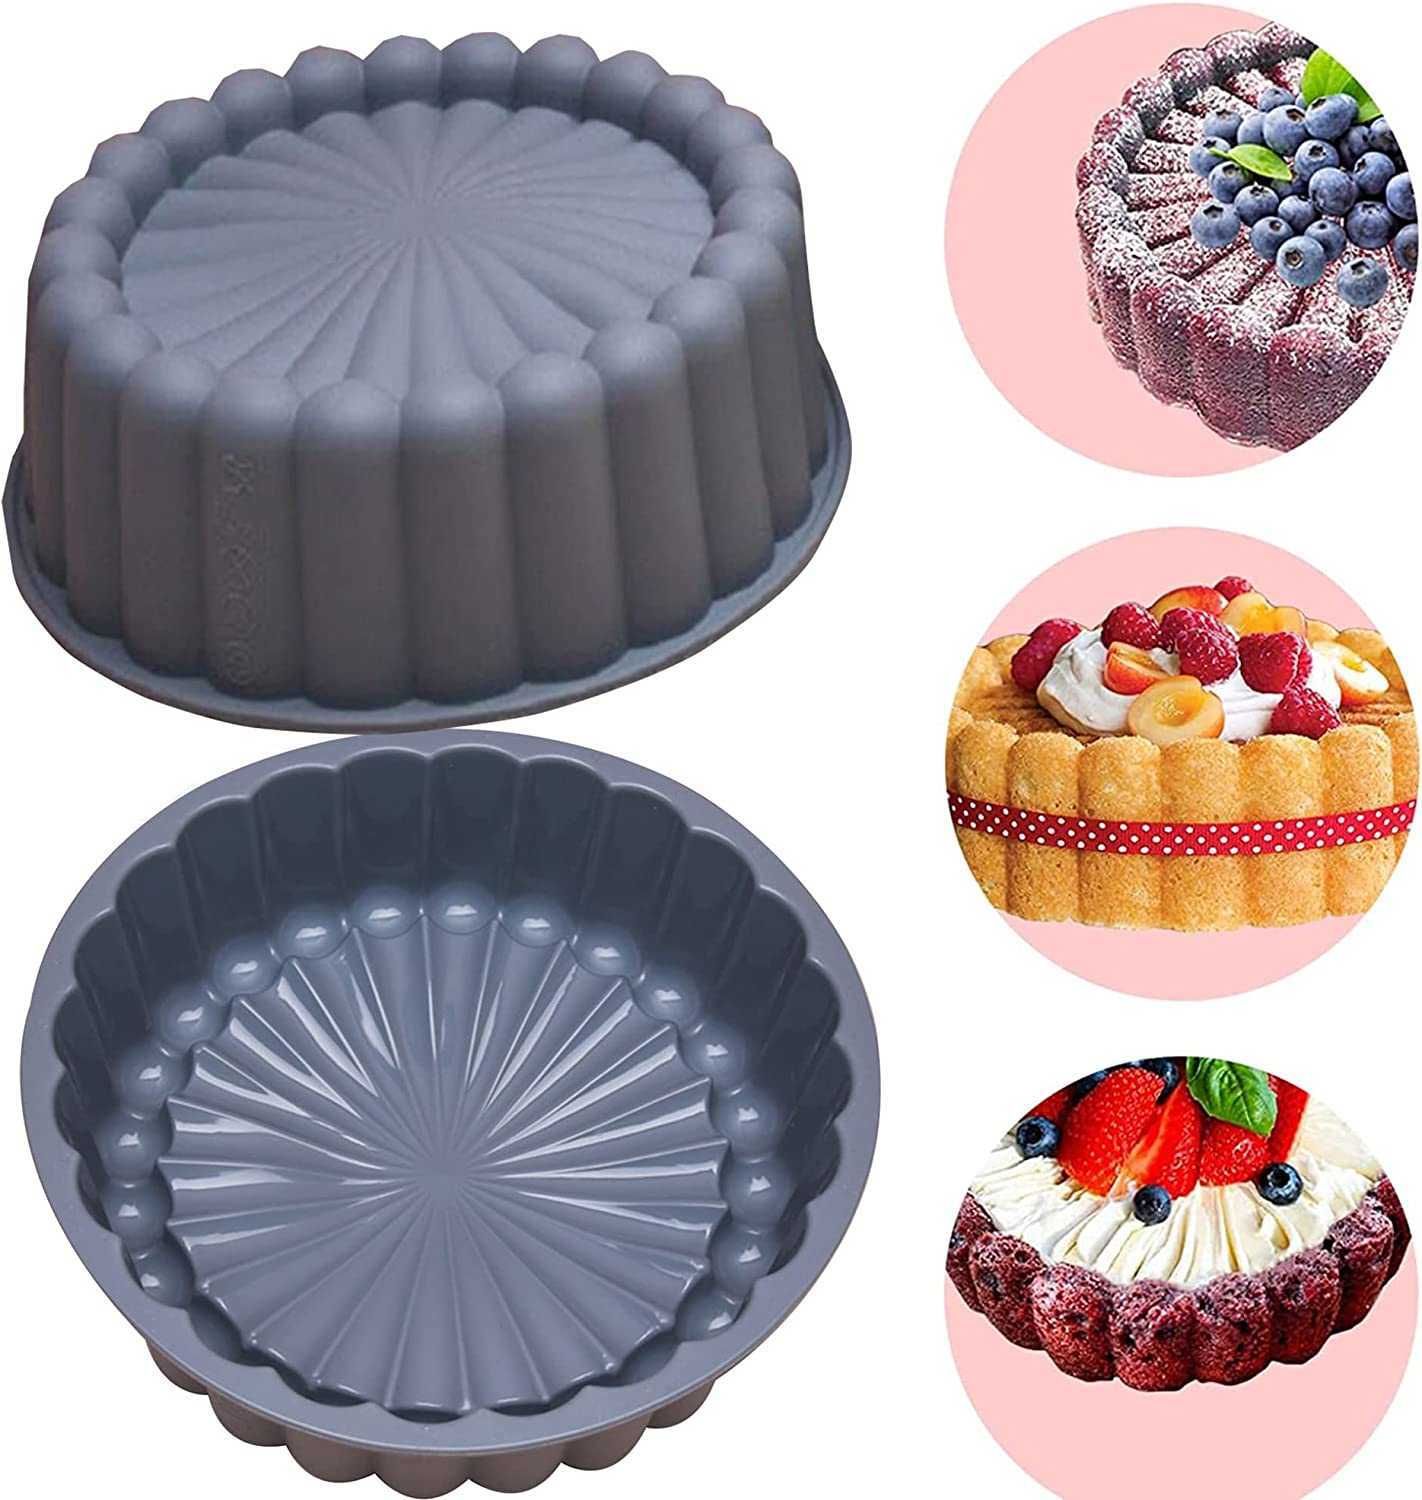 Silicone Nouveau Cake Pan: Nonstick Fluted Mold For Shortcake, Cheesecake,  Brownie, Tart, Pie Reusable & Round From Doorkitch, $5.48